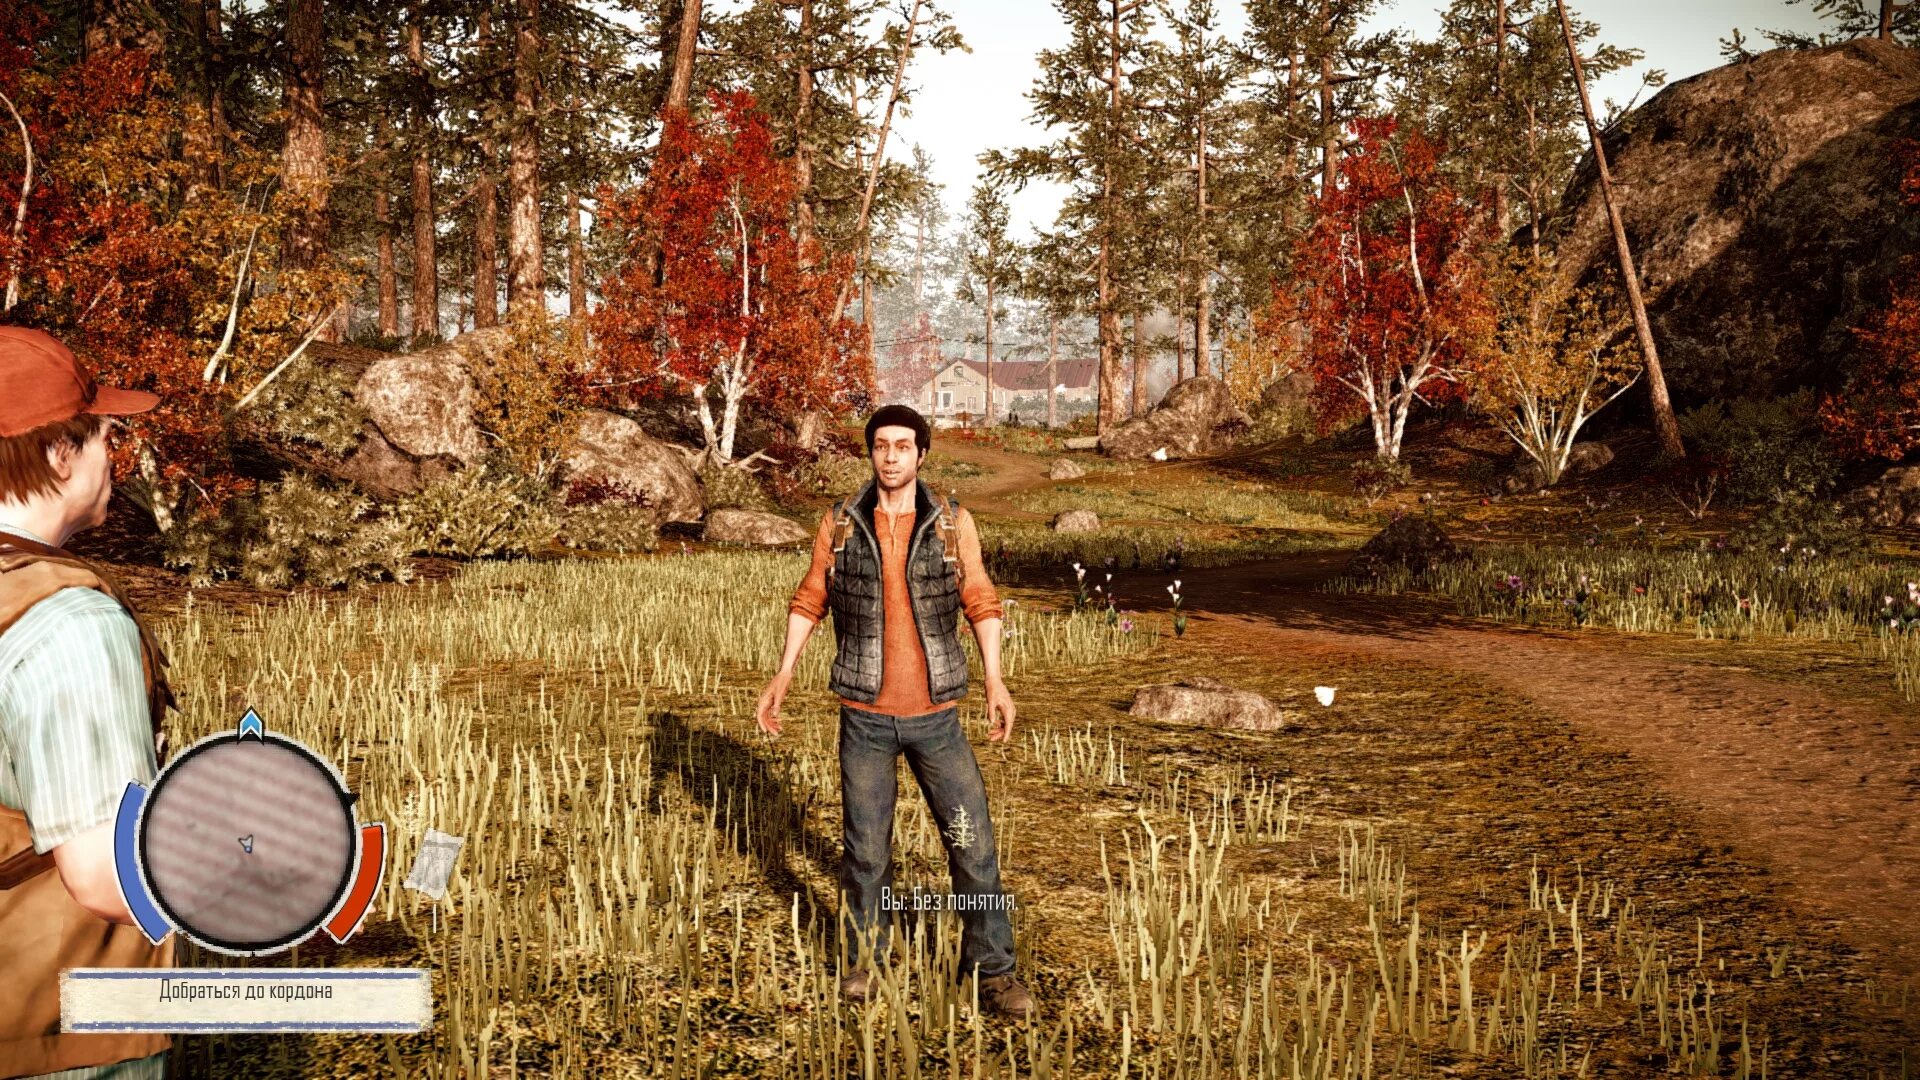 State of Decay 2. State of Decay Maya Torres. State of Decay Maya. Стейт оф дикей моды